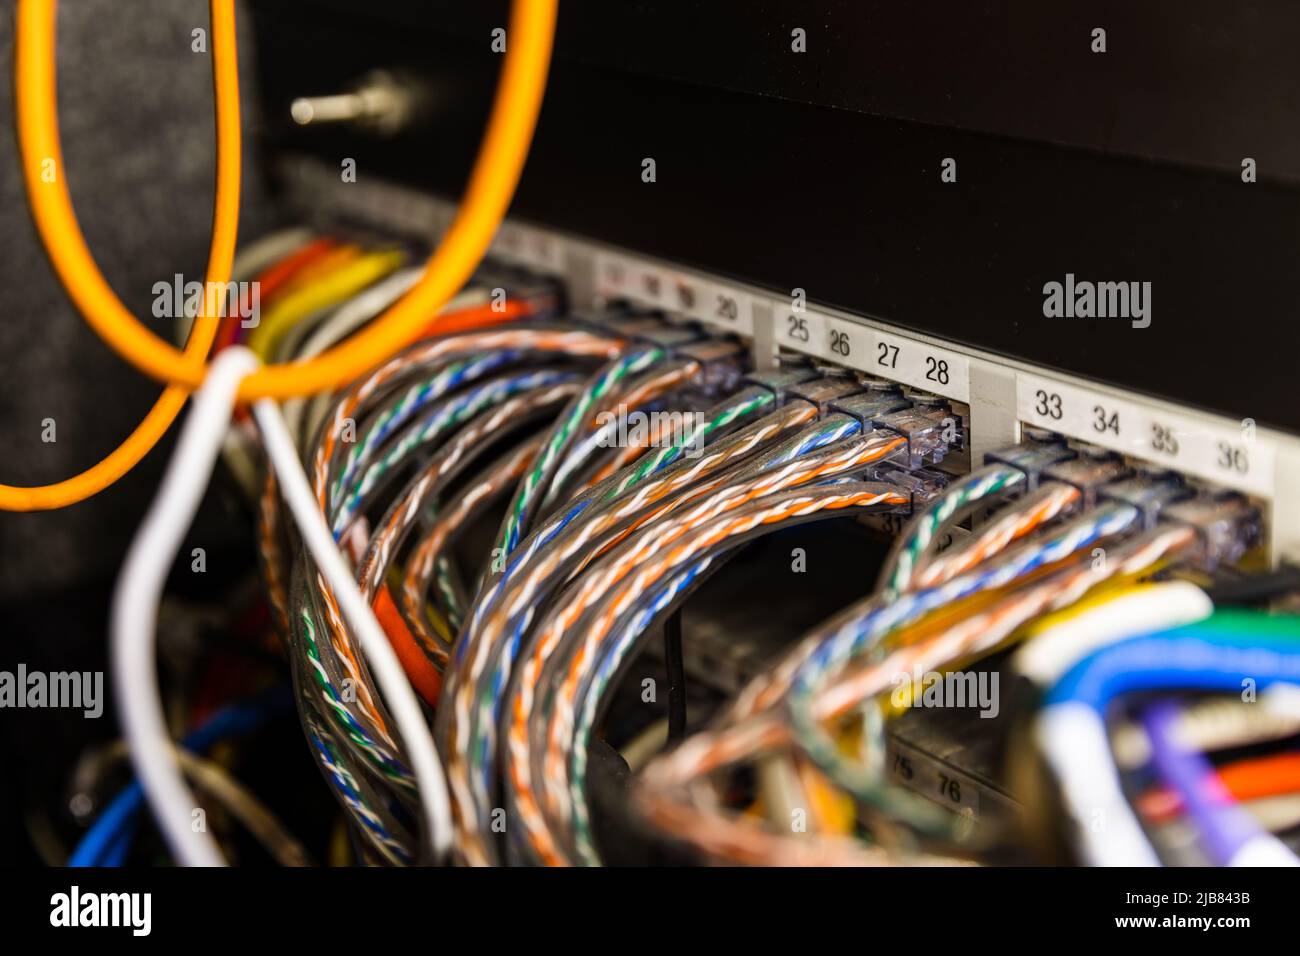 Telecommunications wires in a technical setup, shallow focus. Stock Photo